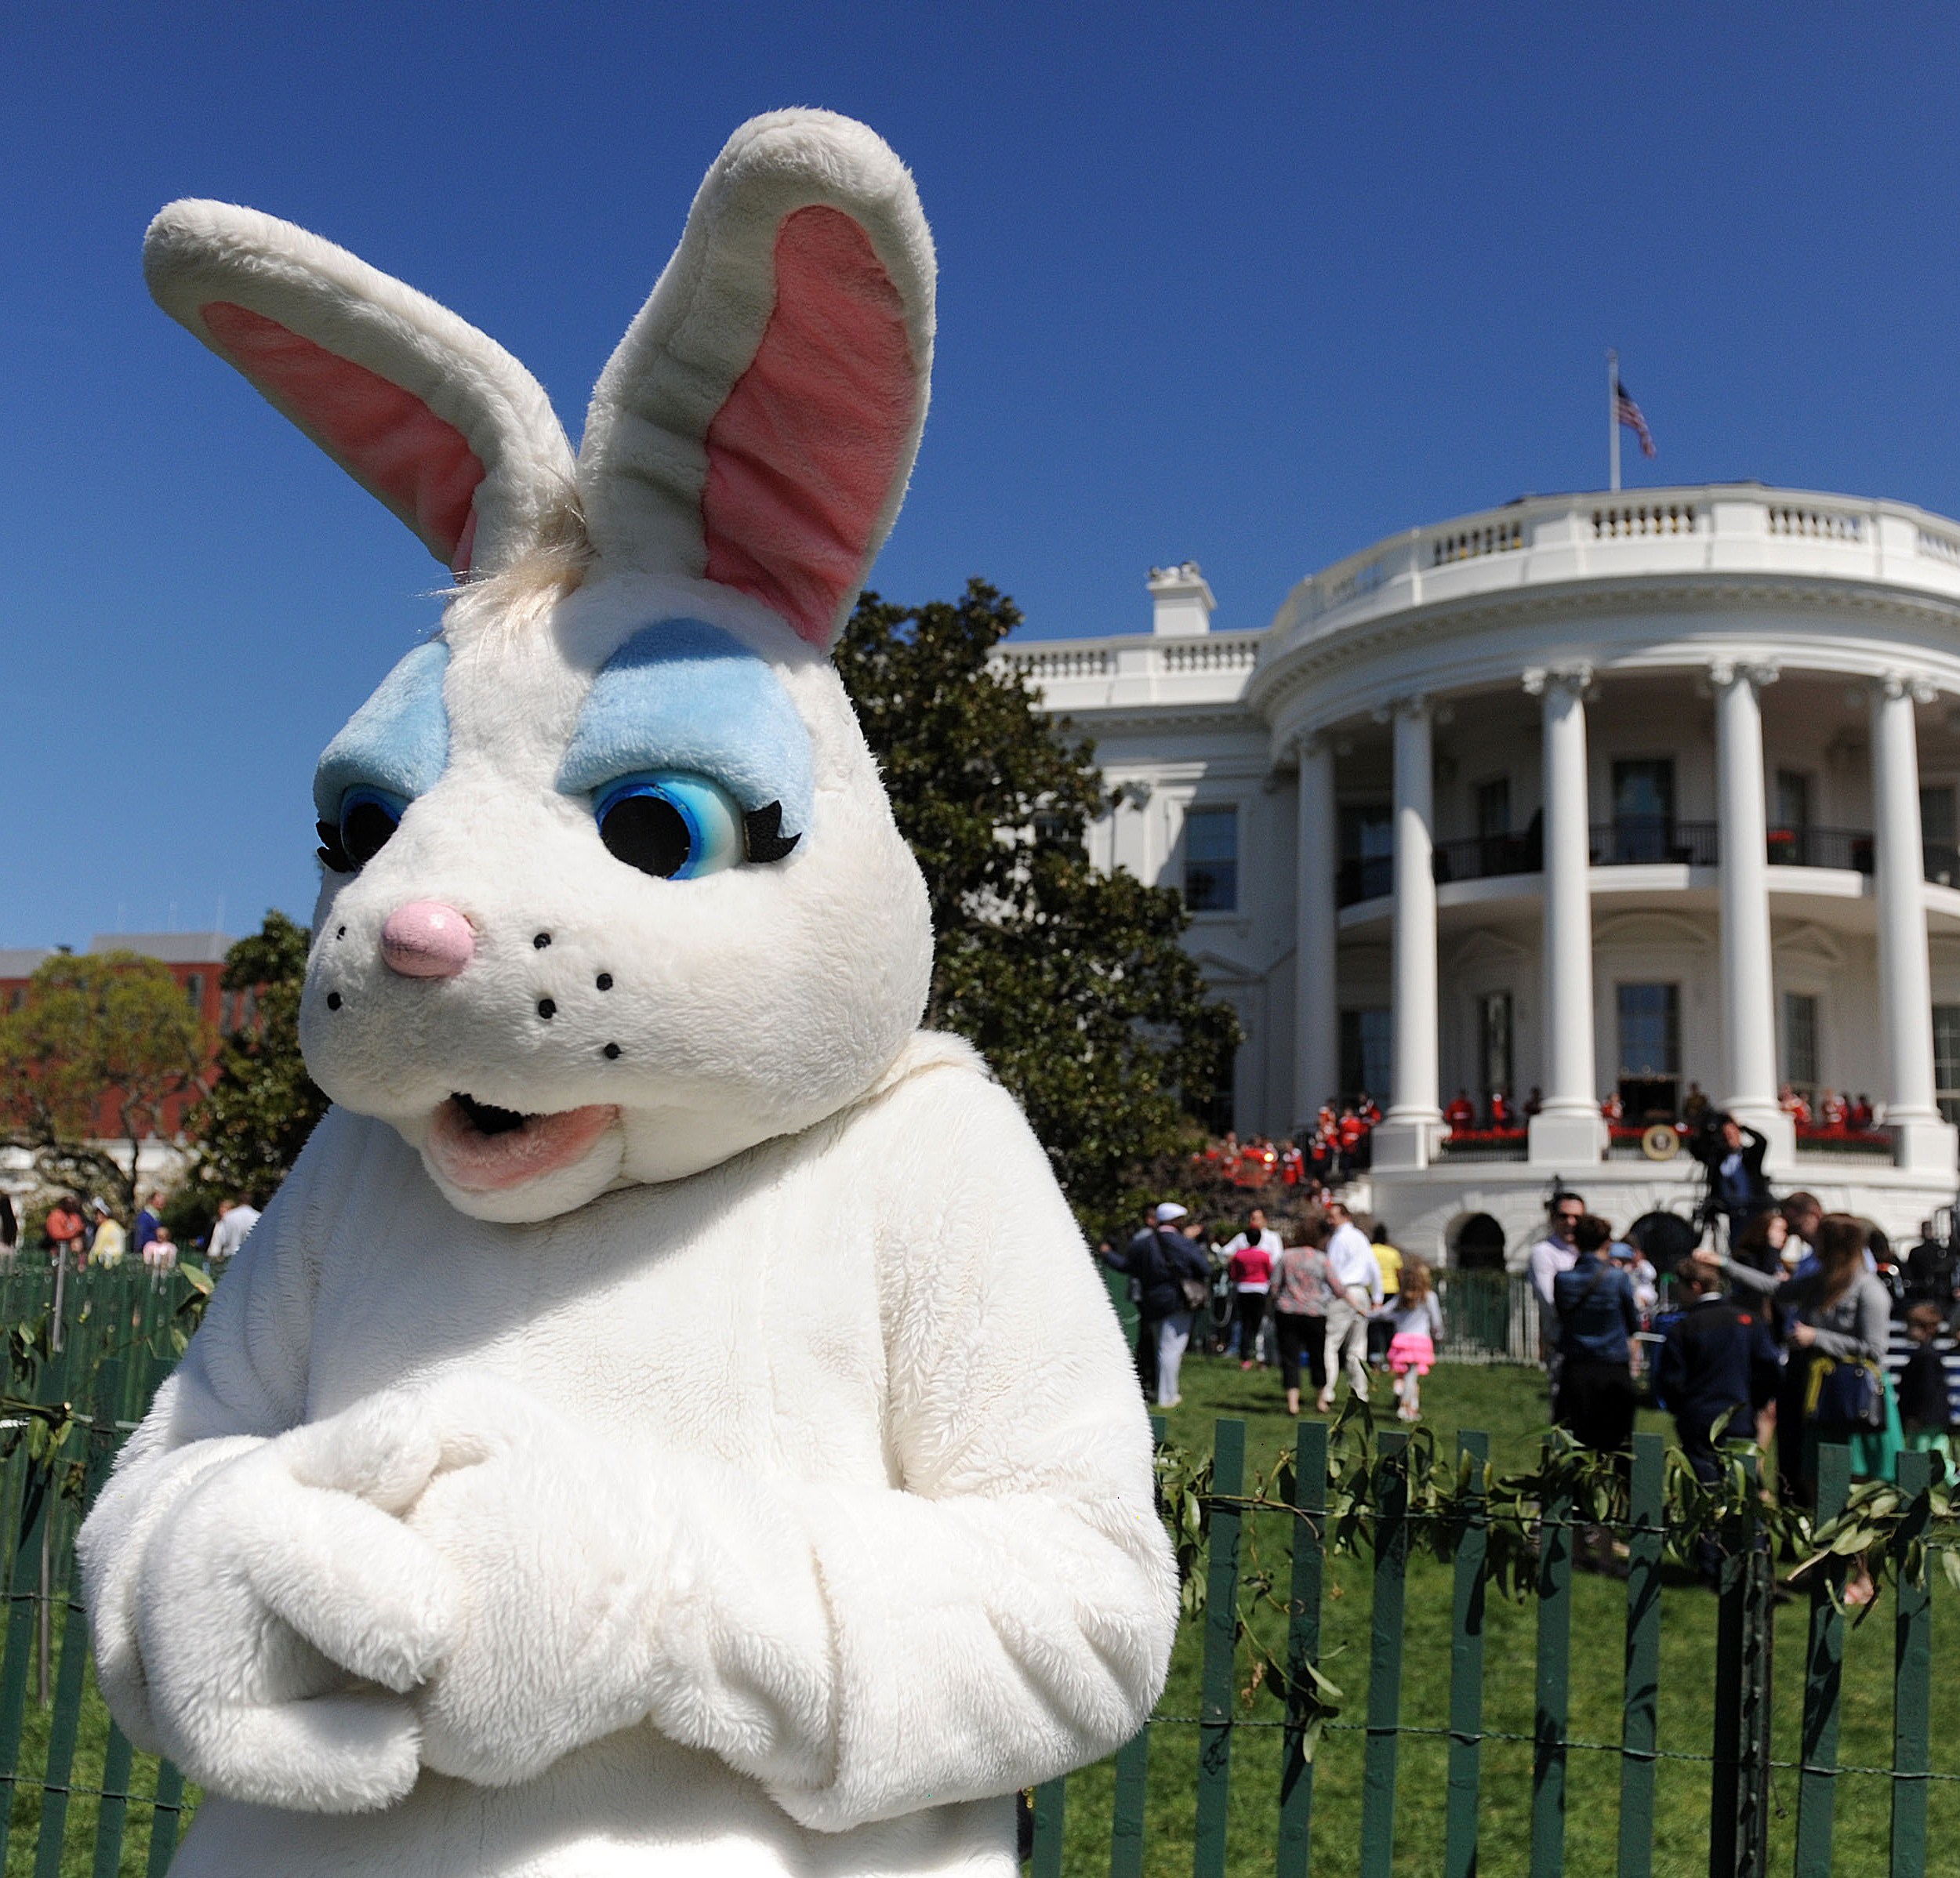 Easter Bunny Costumes Are Creepy [PHOTOS]